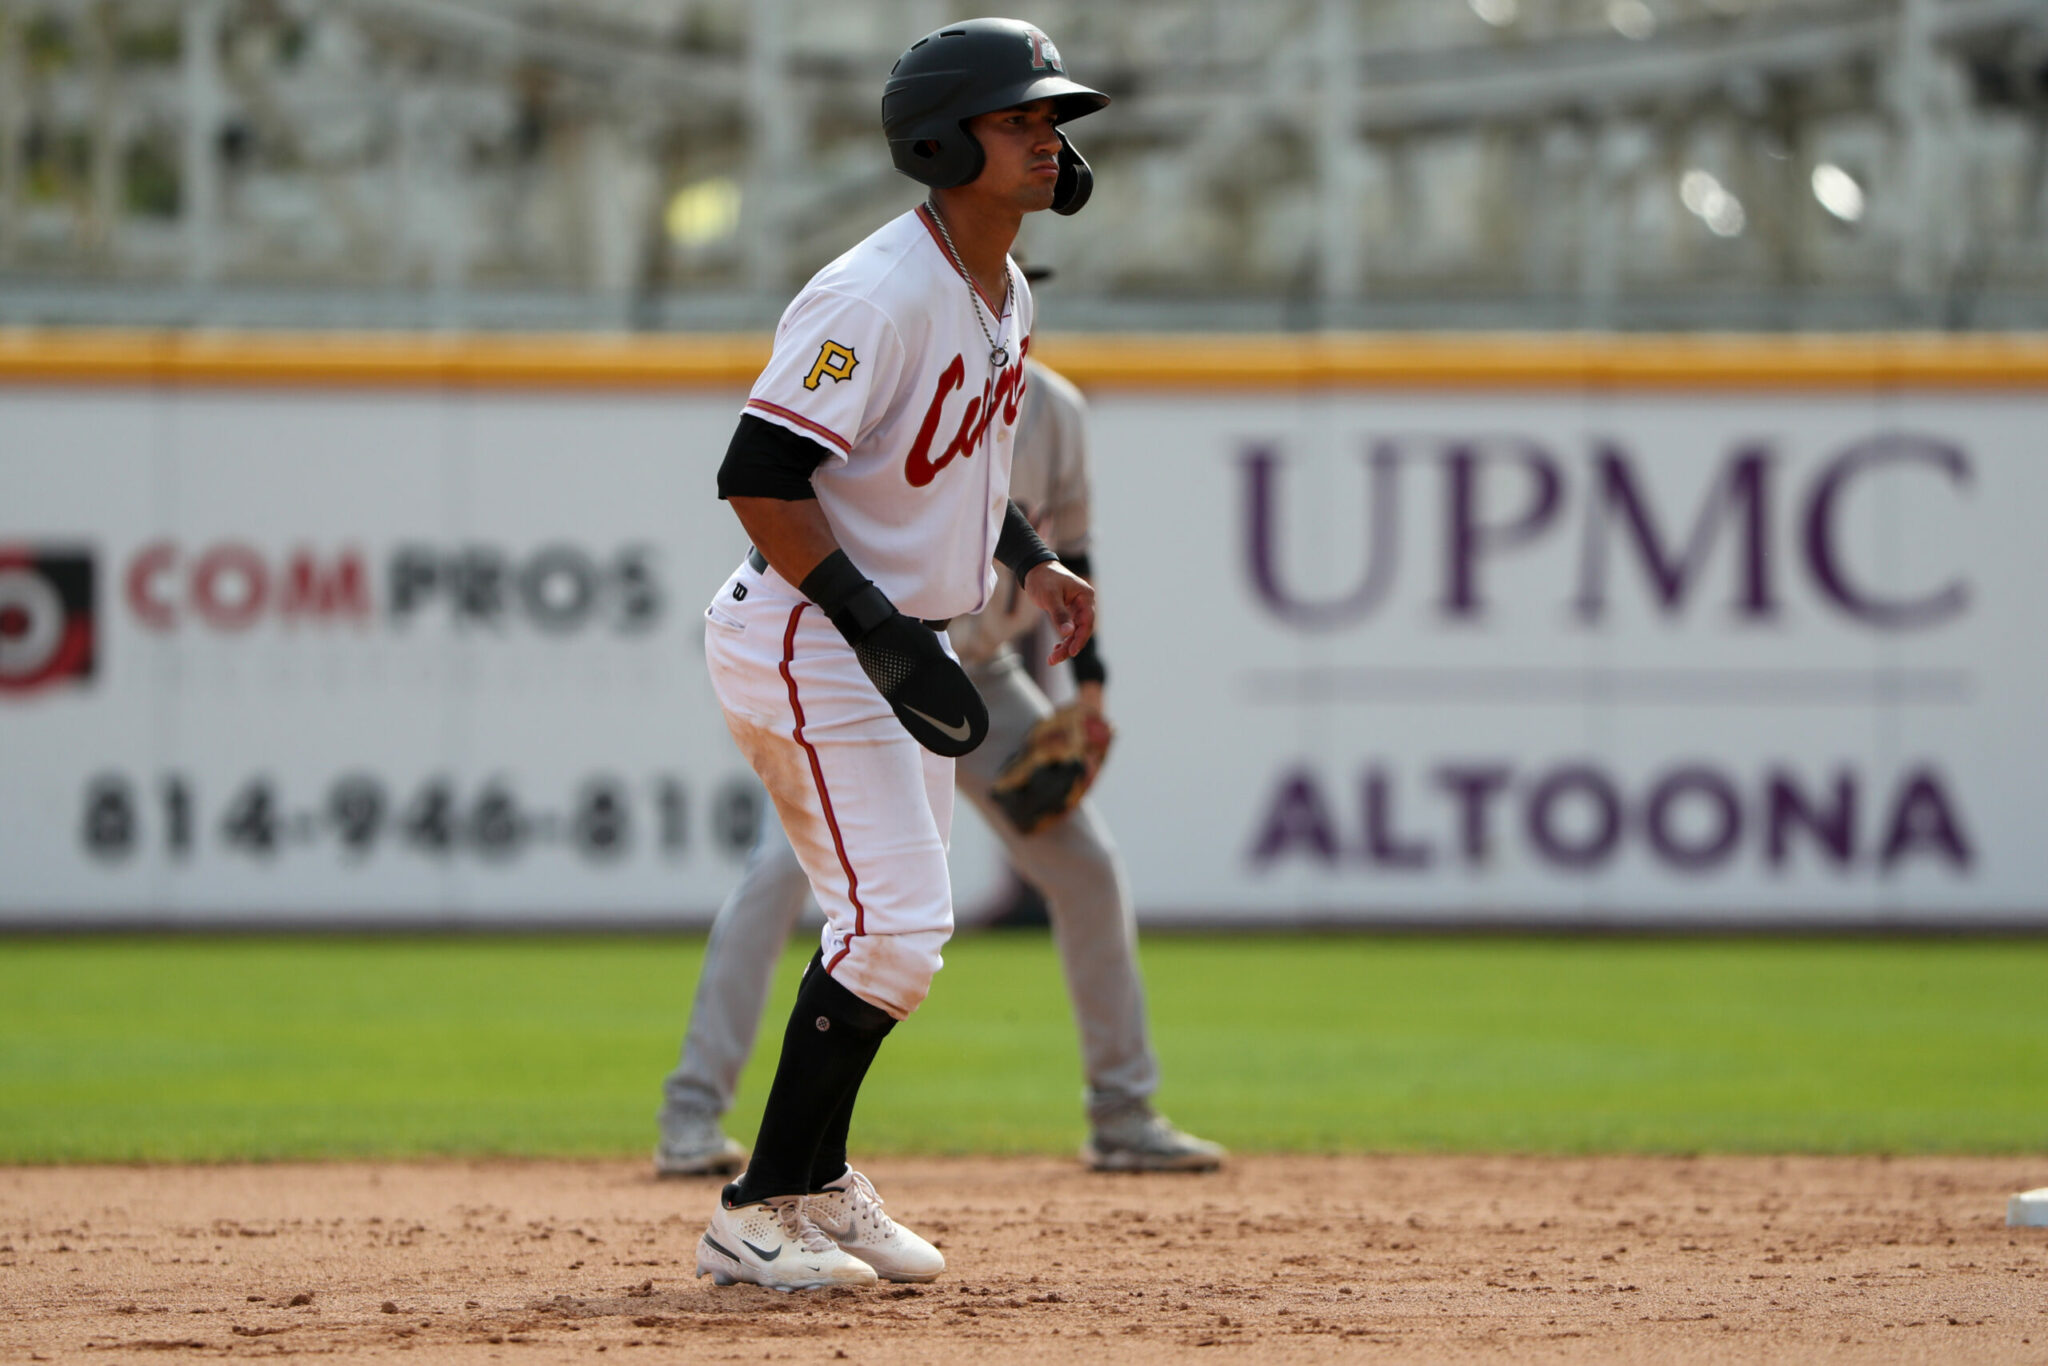 AFL Recap: Nick Gonzales Homers, Reaches Base Four Times in Loss